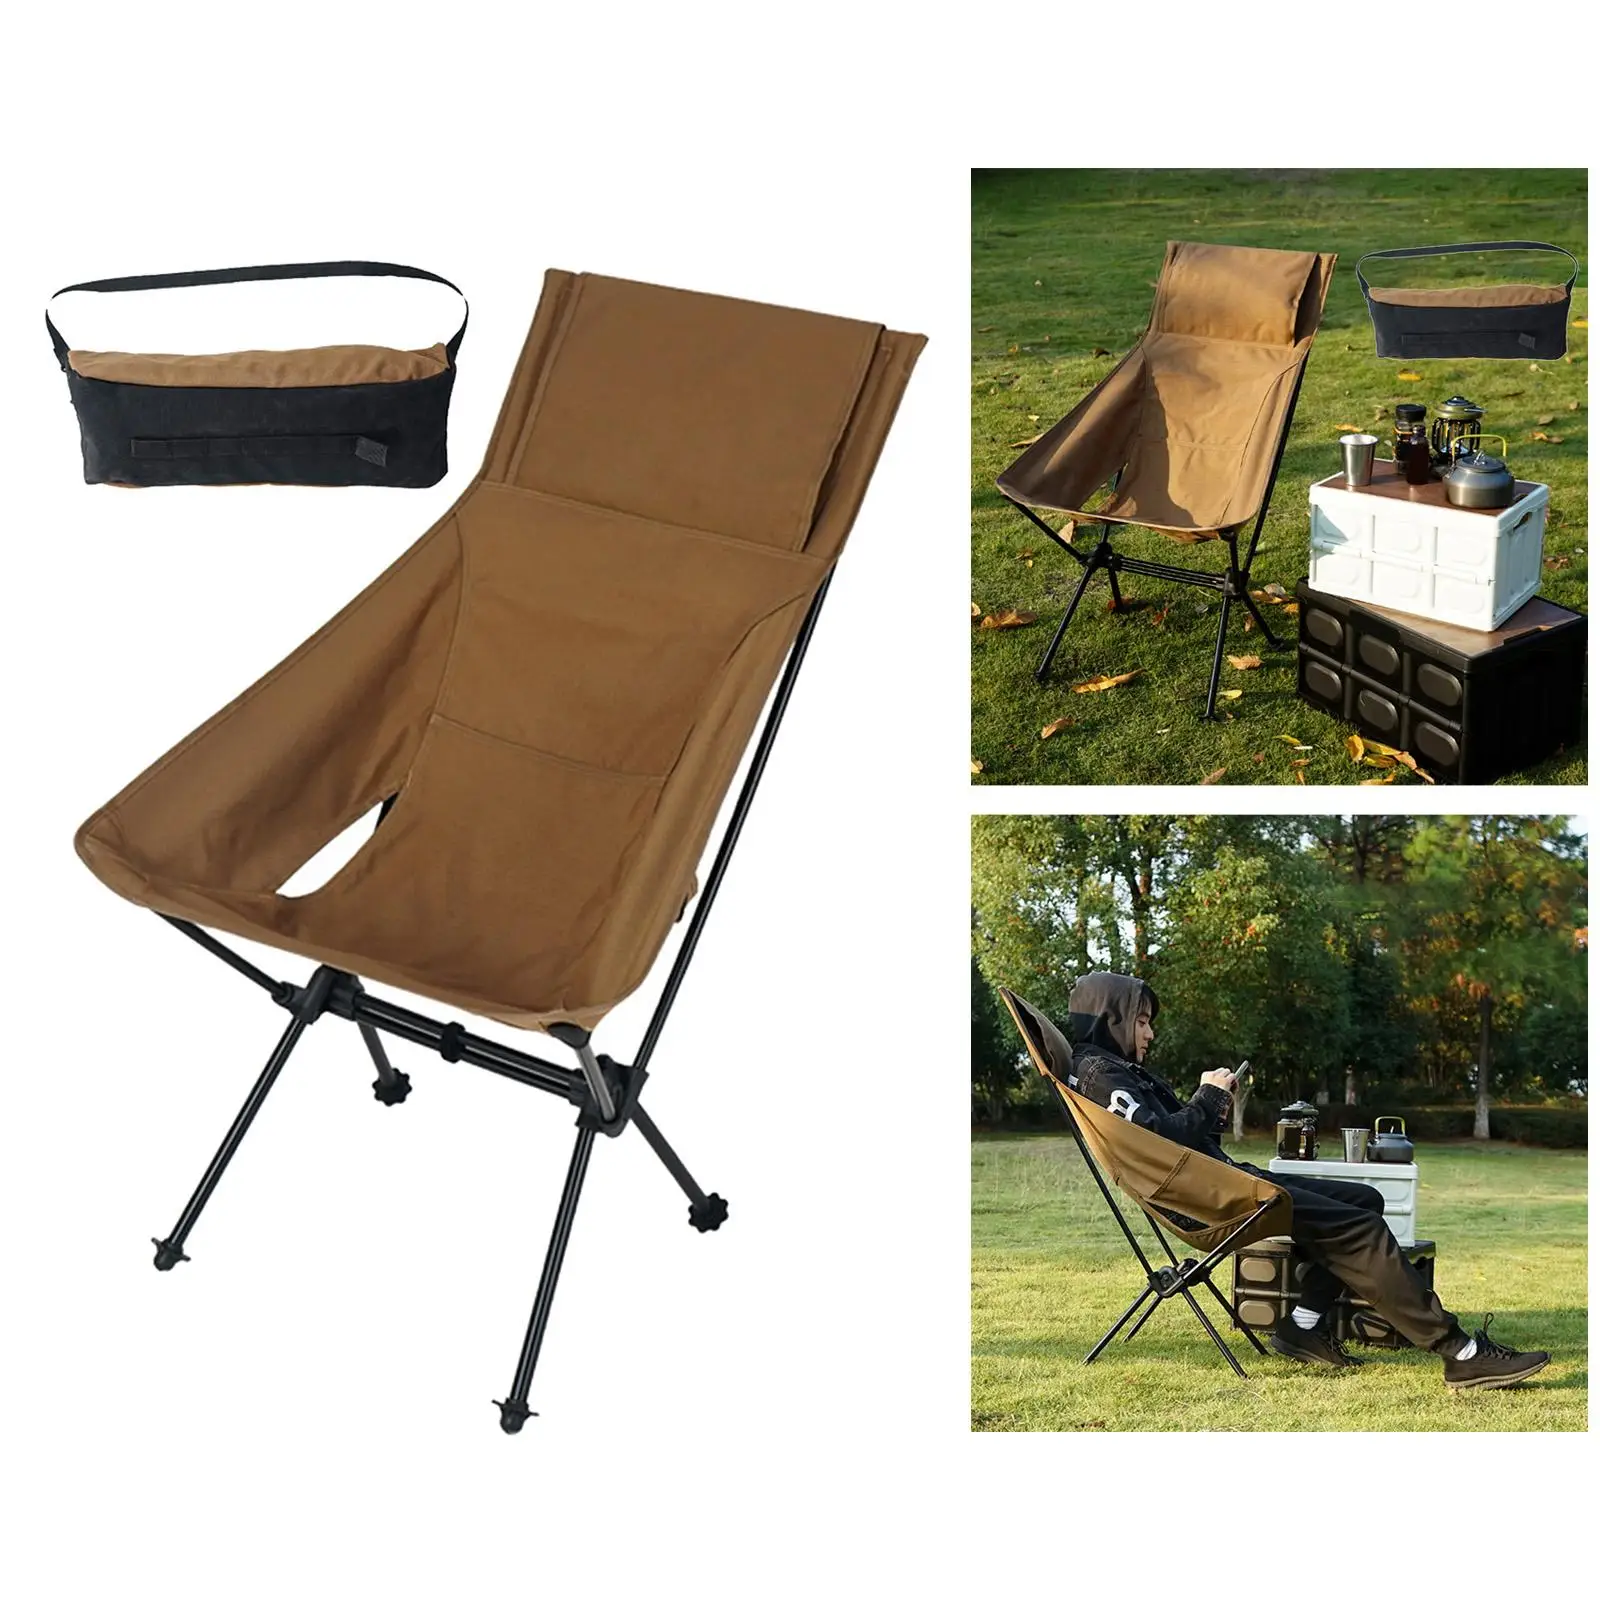 Ultralight Folding Portable Camping Seat for Outdoor Lawn BBQ